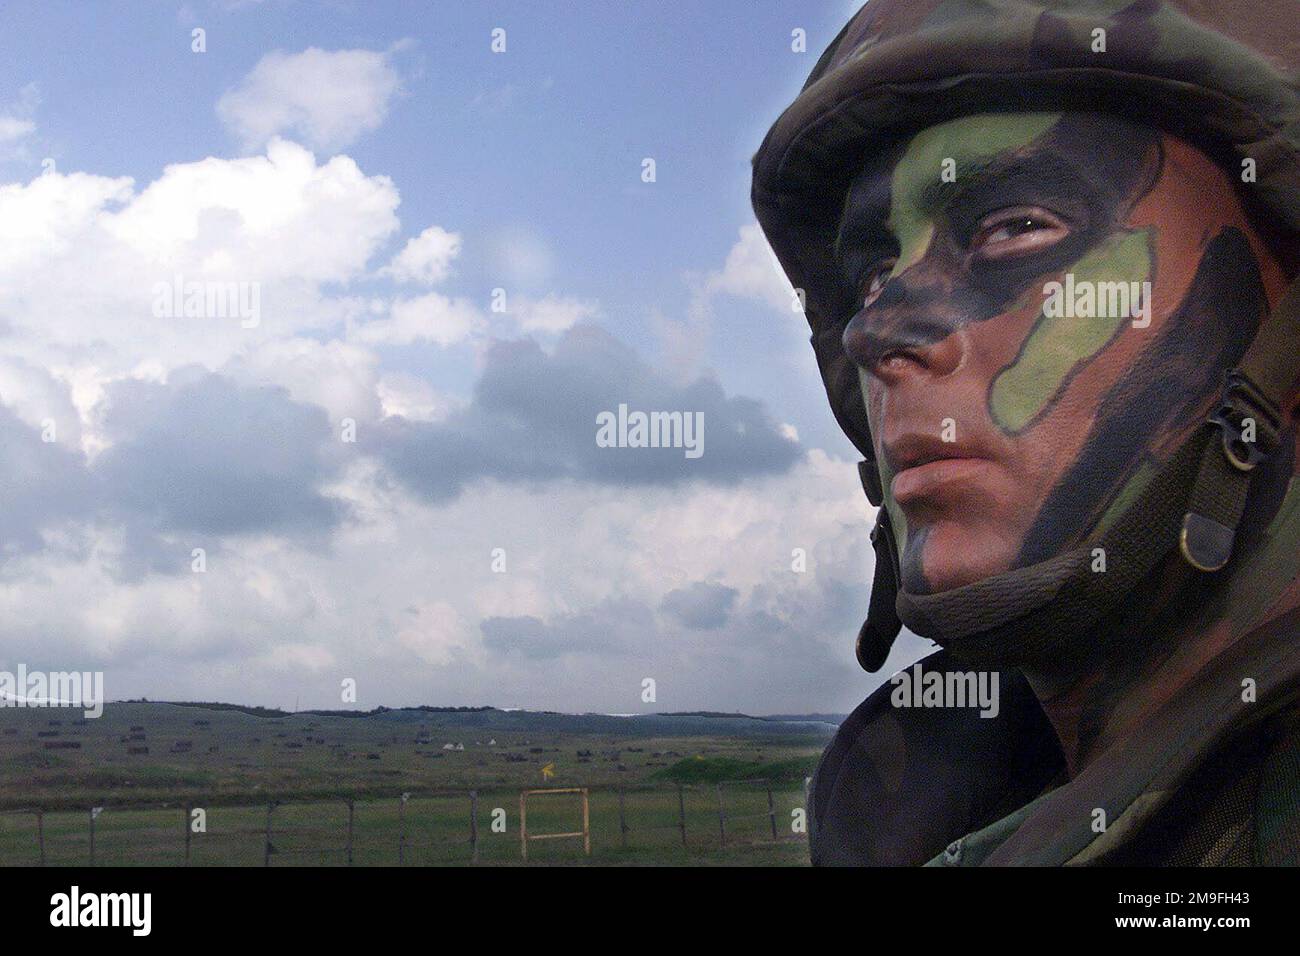 https://c8.alamy.com/comp/2M9FH43/a-close-up-view-of-the-camouflaged-painted-face-of-us-air-force-staff-sergeant-jeremy-s-sparks-from-the-air-force-special-operations-command-as-he-prepares-to-compete-in-the-combat-weapons-competition-at-camp-bullis-texas-during-exercise-defender-challenge-2000-subject-operationseries-defender-challenge-2000-base-camp-bullis-state-texas-tx-country-united-states-of-america-usa-2M9FH43.jpg